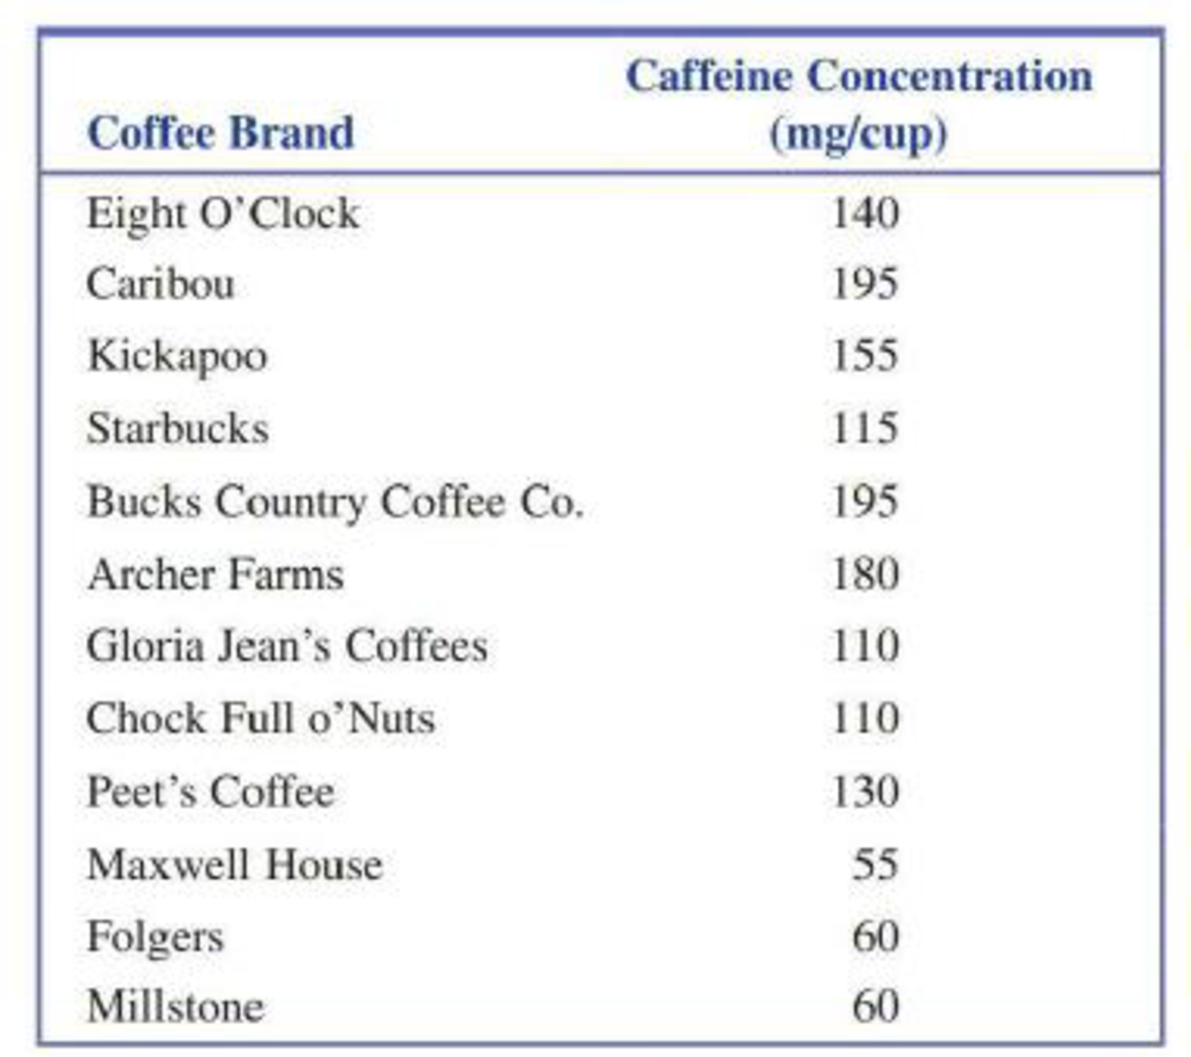 Chapter 4.1, Problem 3E, Consumer Reports Health (consumerreports.org/health) reported the accompanying caffeine 